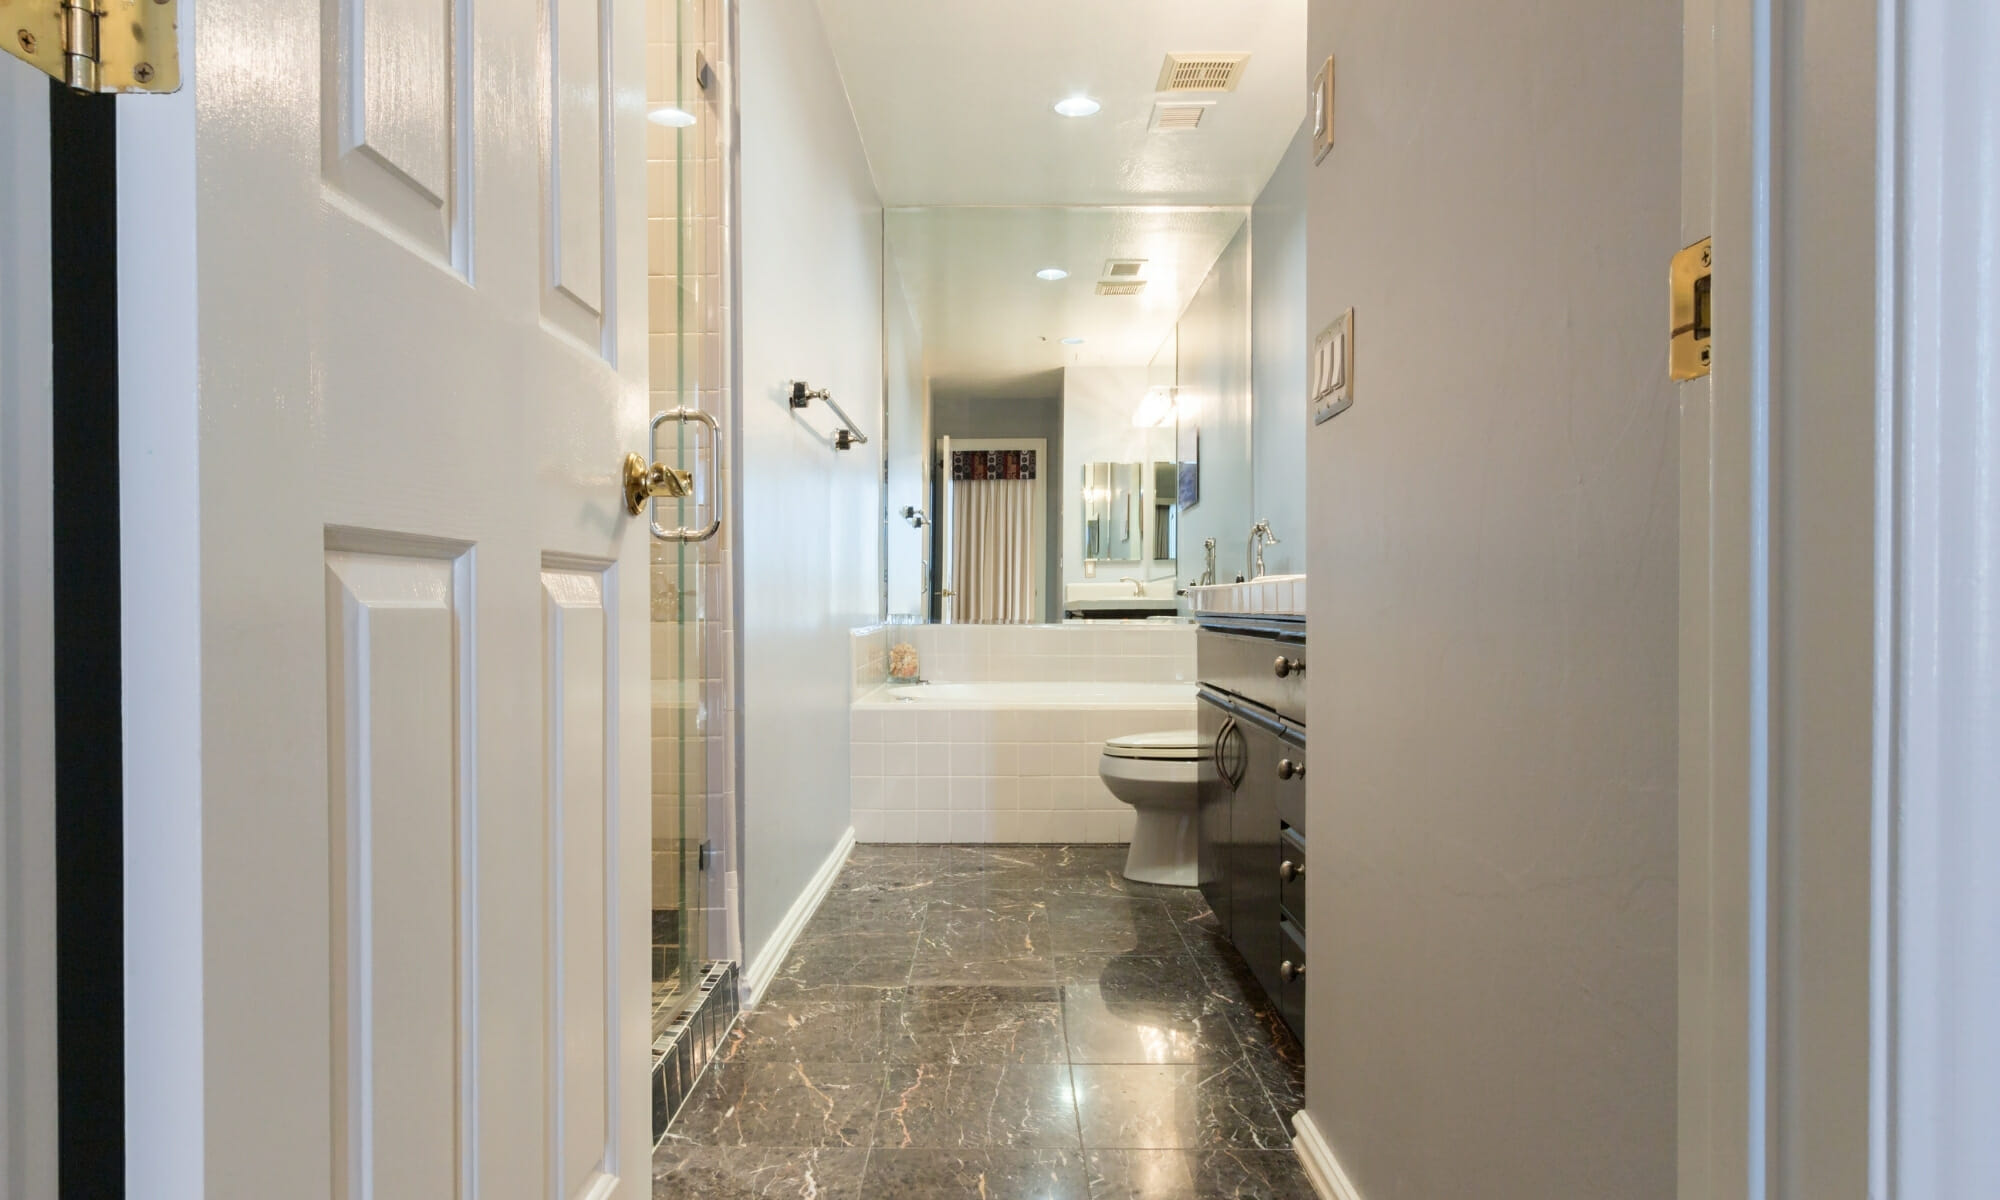 10 Common Bathroom Renovation Mistakes You Should Avoid